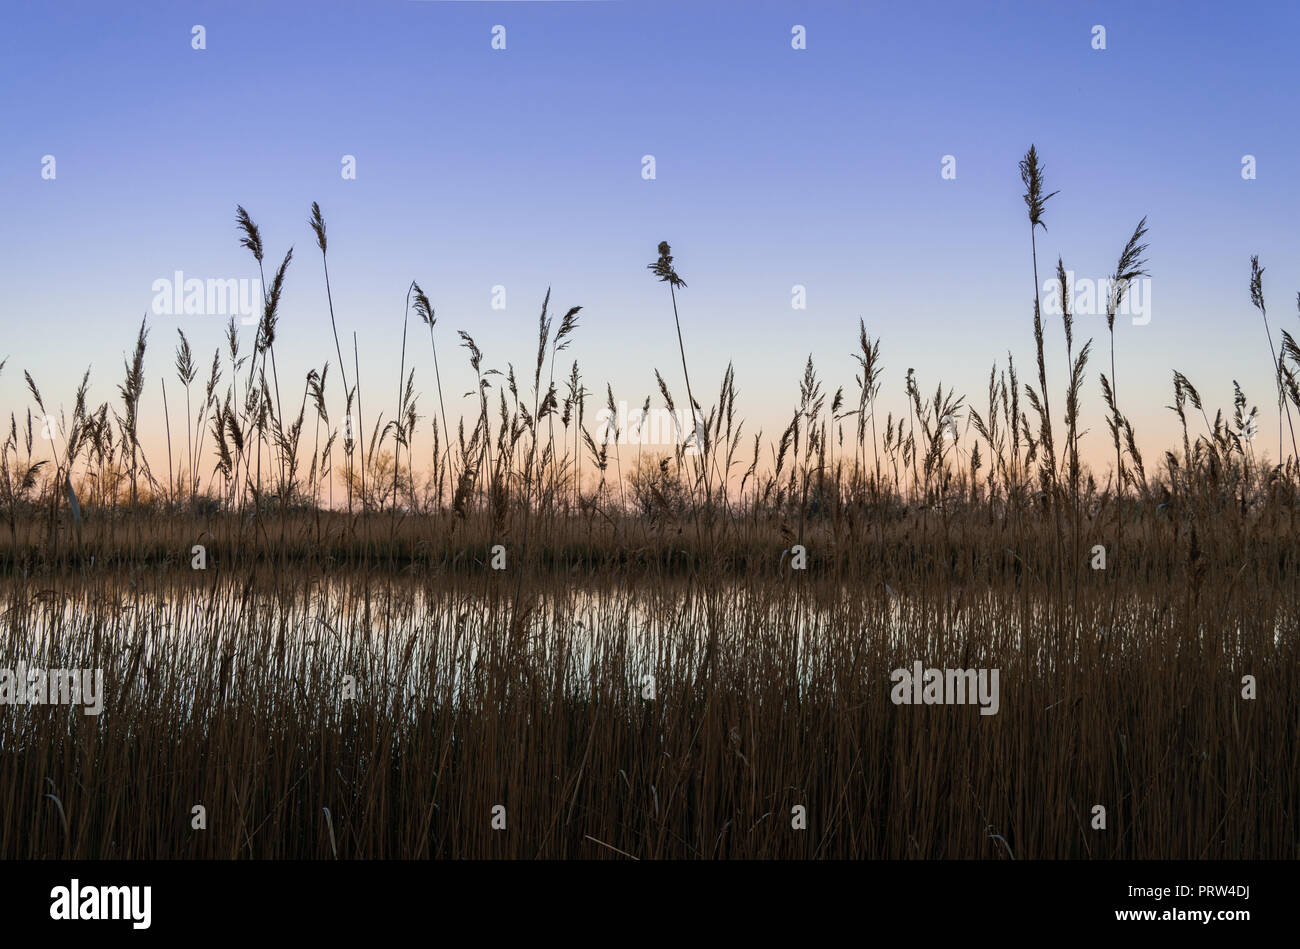 Tall brown reeds (bulrushes) near lake in a sunset time. Tranquil scene. Spring nature. Stock Photo